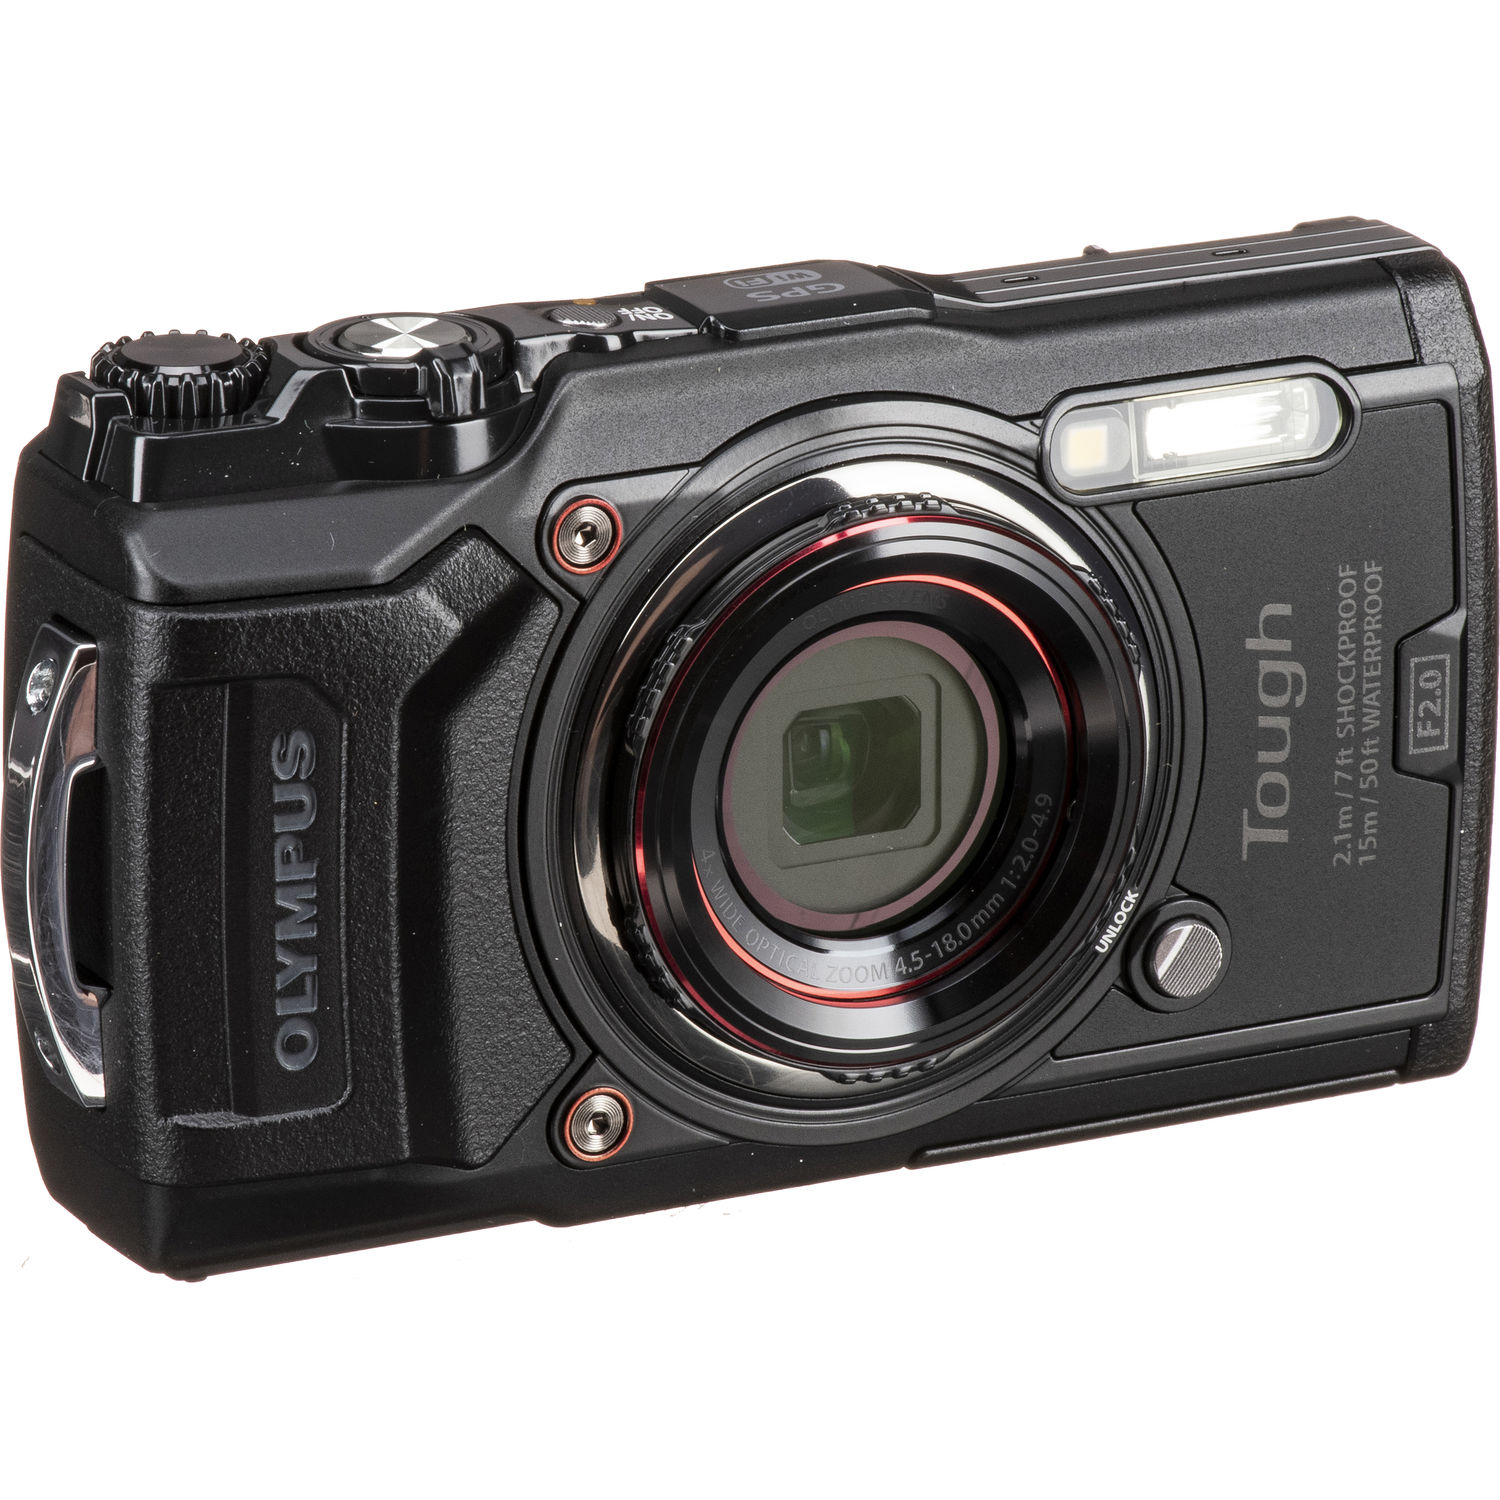 Olympus Tough TG-6 Waterproof Camera (Black) - Adventure Bundle - With 2 Extra Batteries + Float Strap + Sandisk 64GB Ultra Memory Card + Padded Case + Flex Tripod + Photo Software Suite + More - image 3 of 7